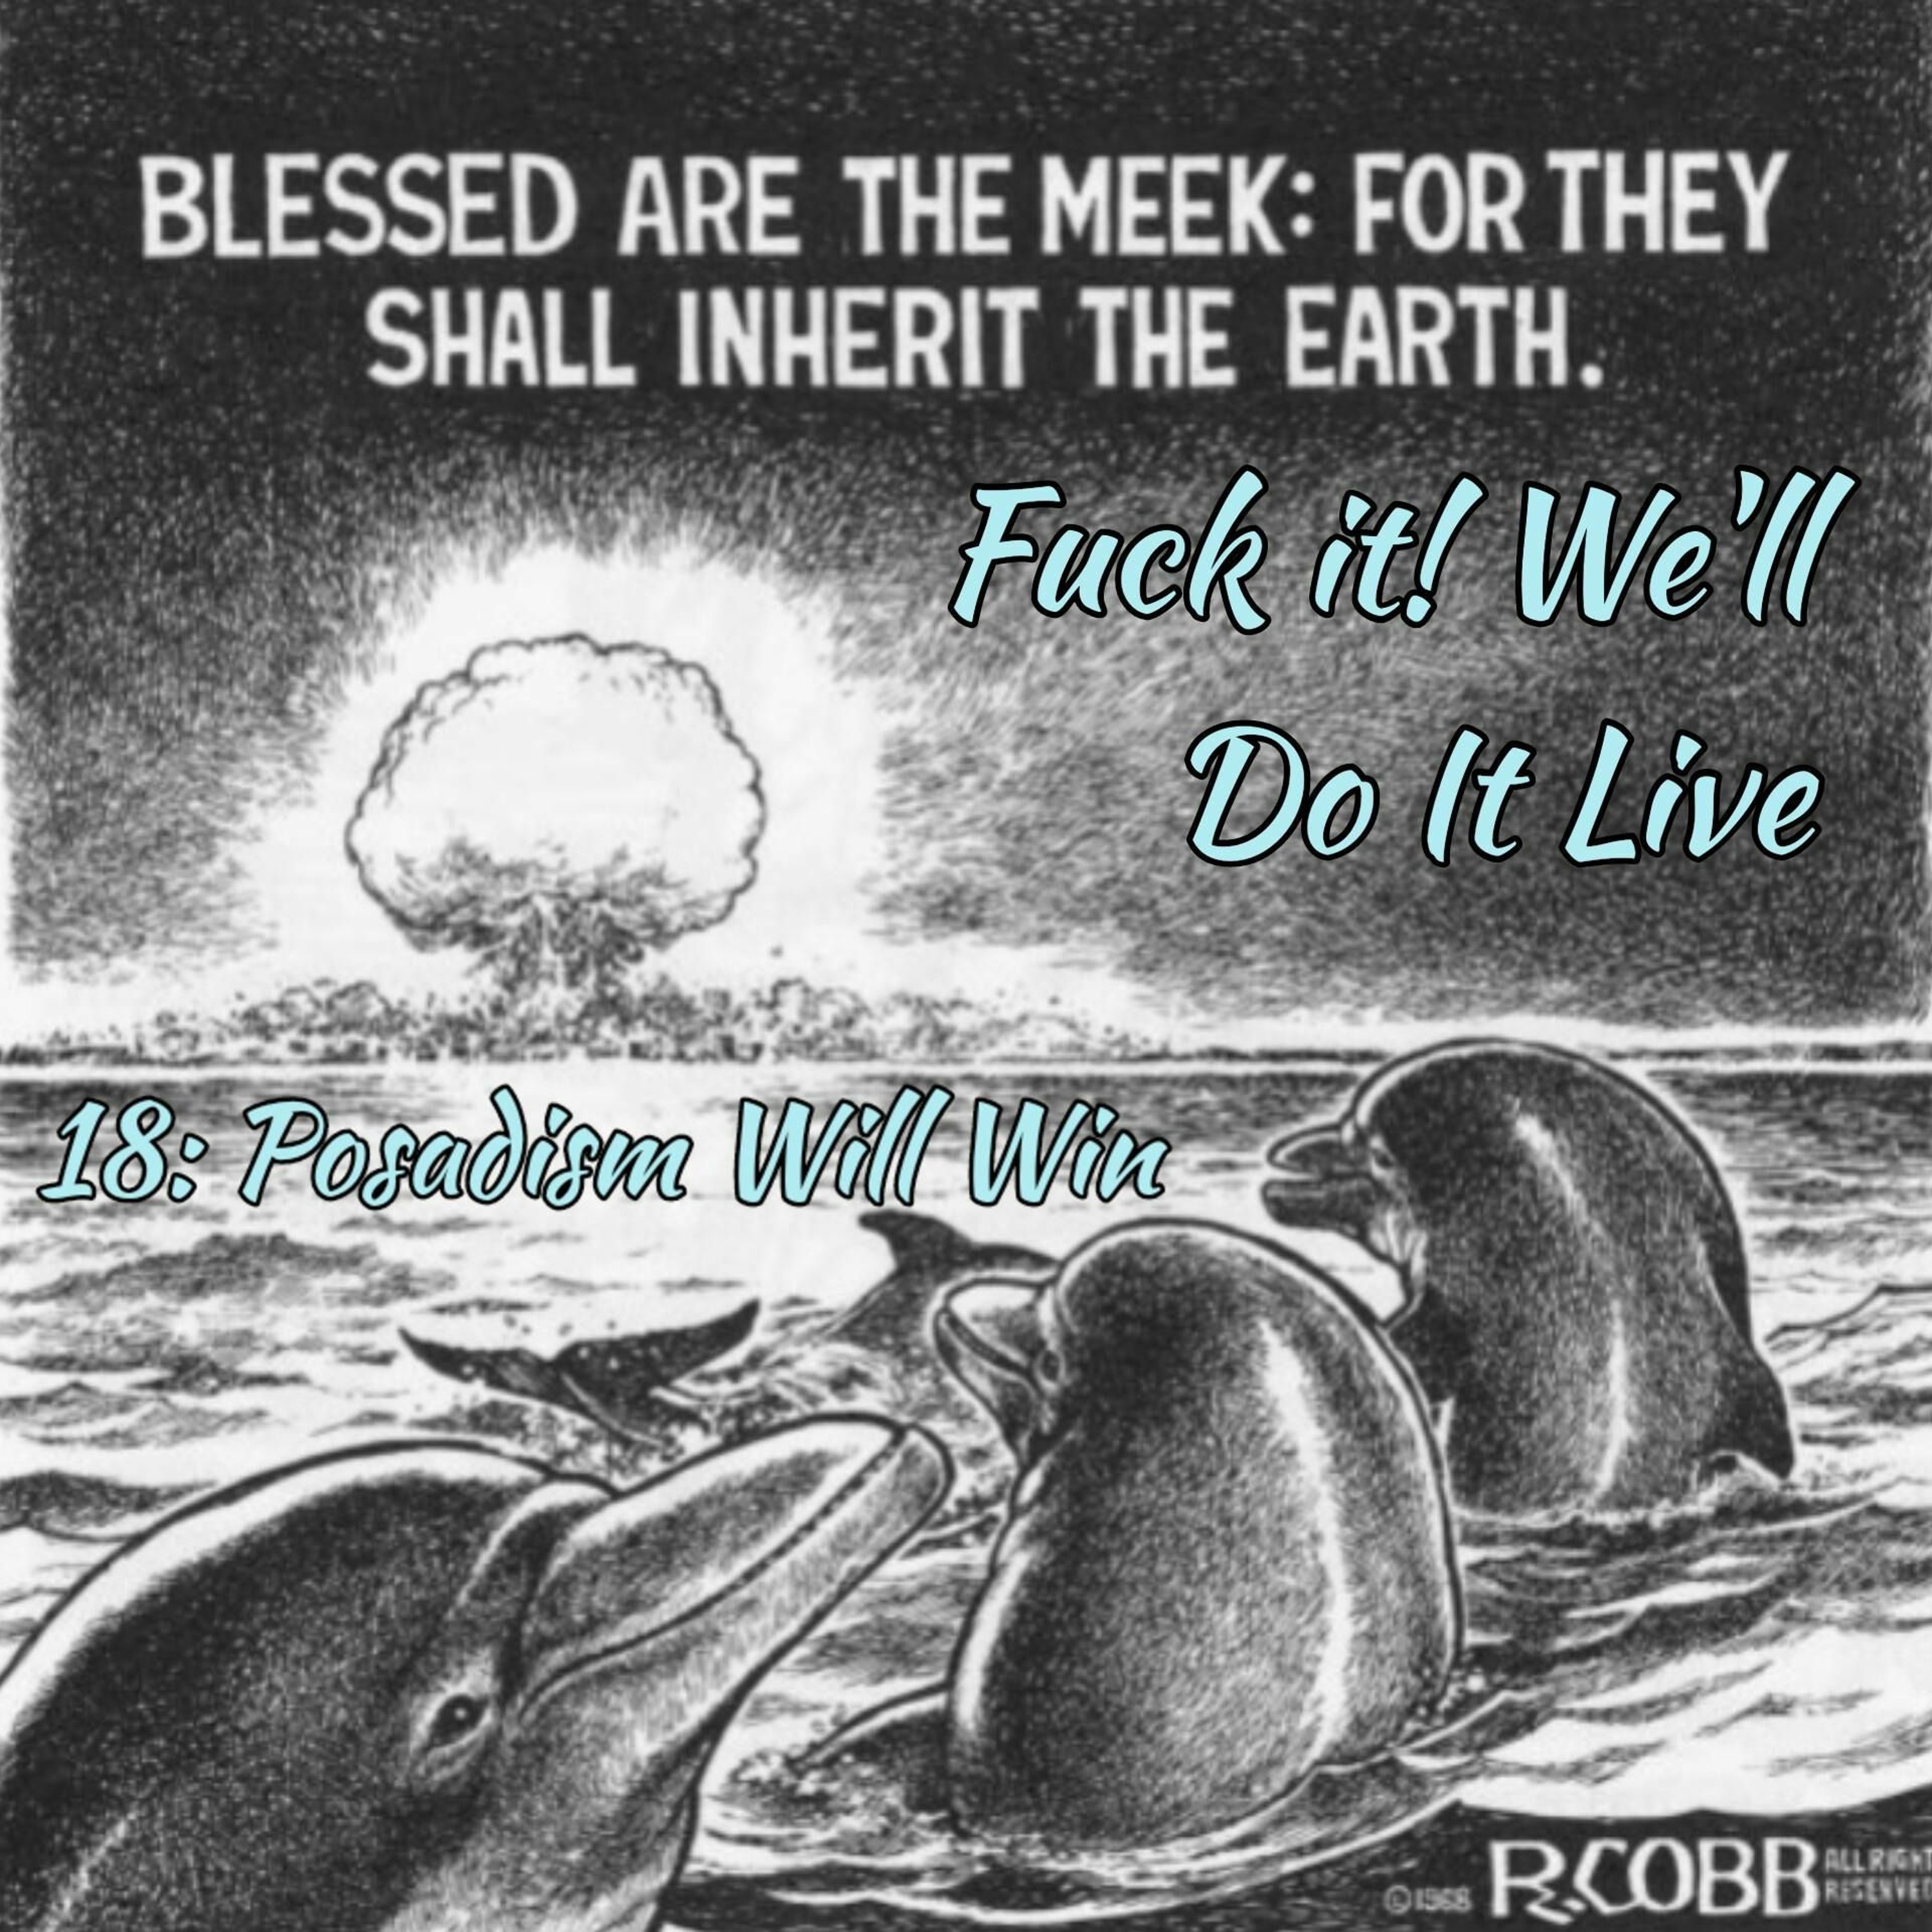 Fμck It, We'll Do it Live! Episode 18: Posadism Will Win